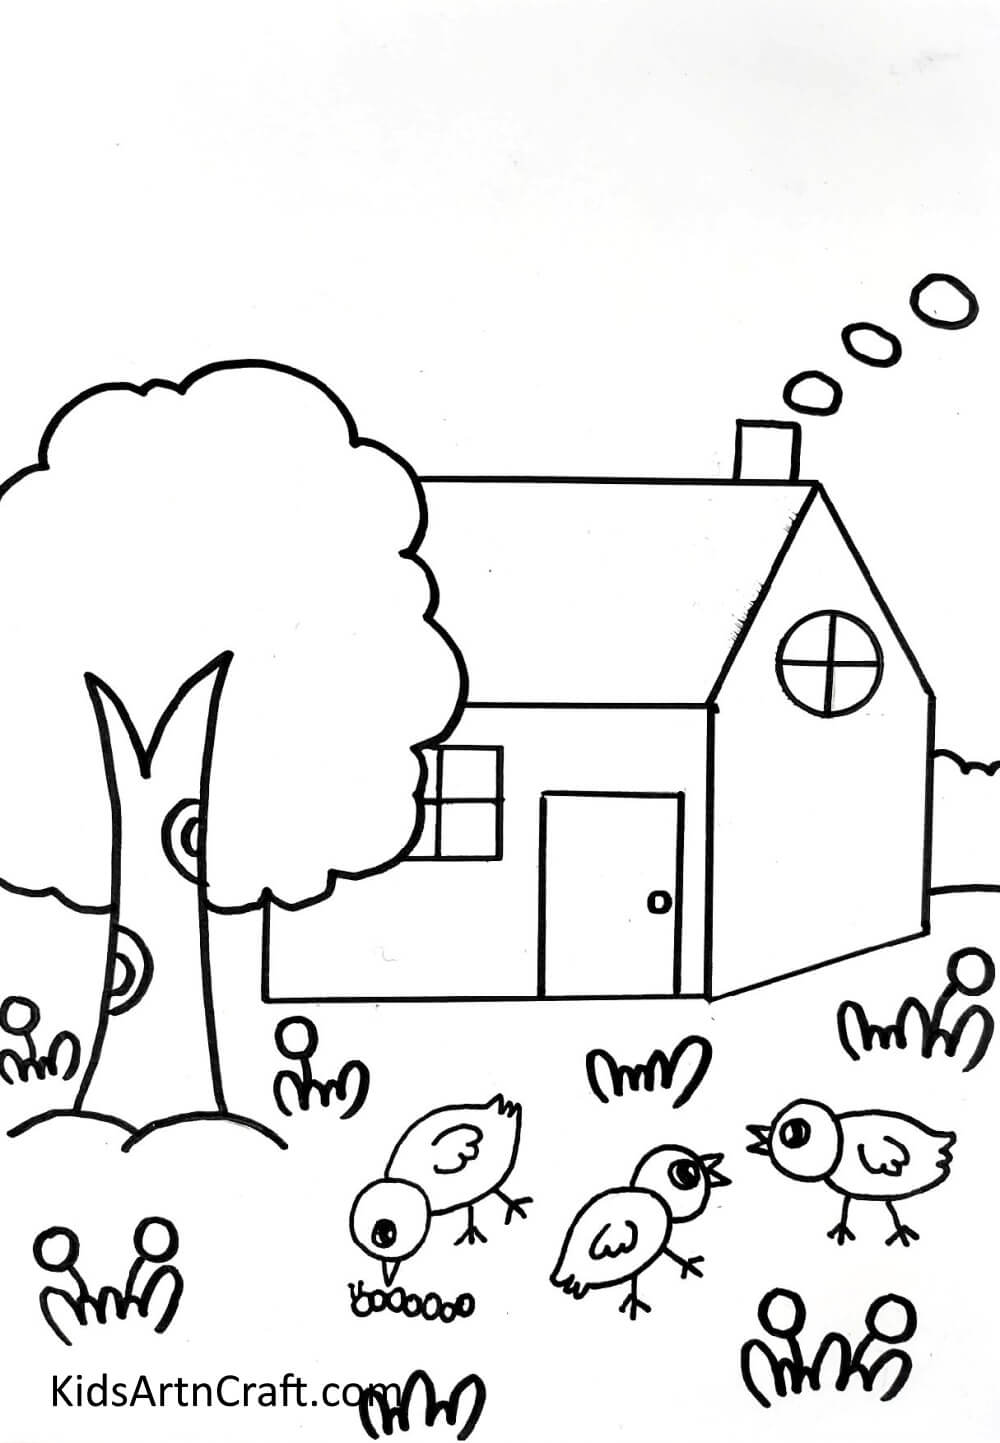 Drawing Birds And Garden Making a house, tree, and landscape sketch step by step